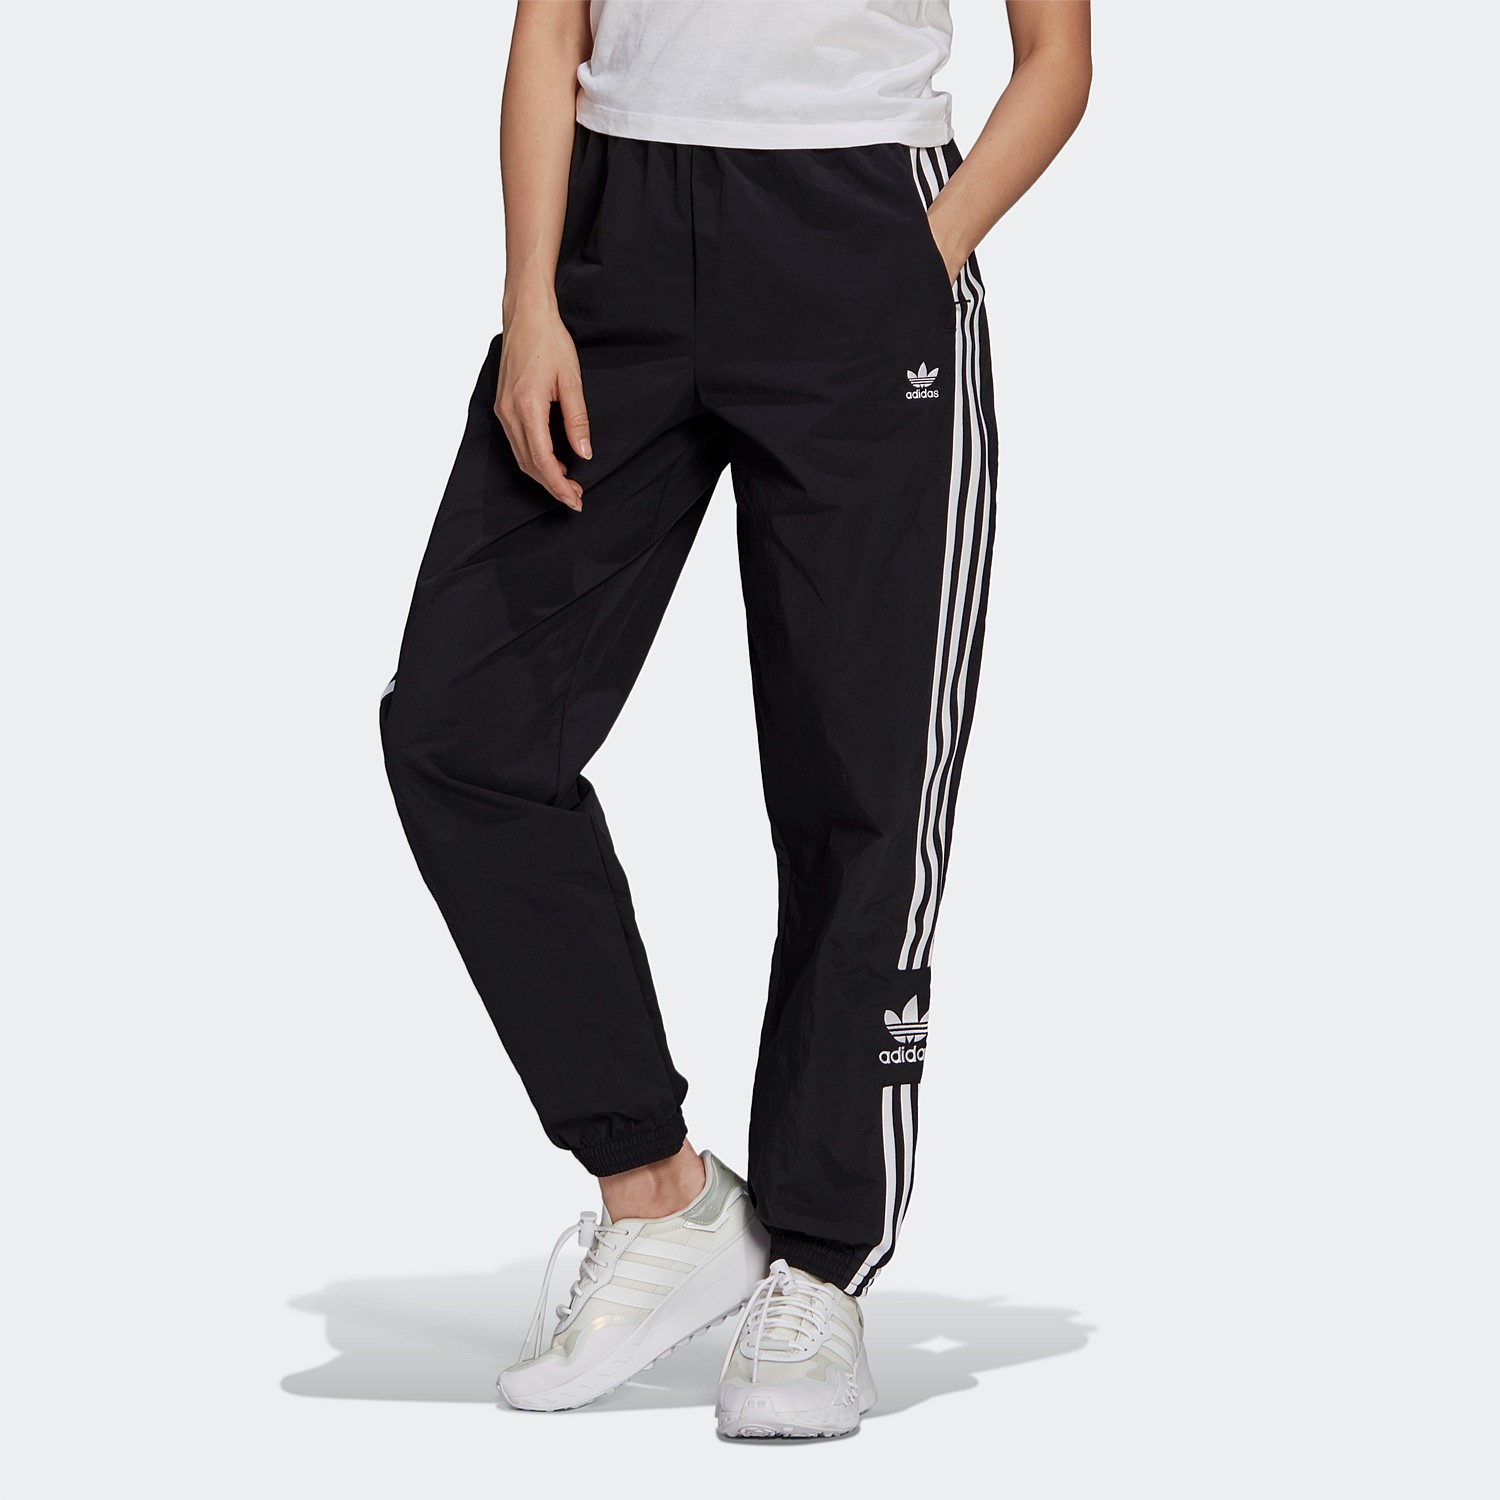 New Arrivals for Men's, Women's and Kid's  Stirling Sports - Adicolor  Classics Lock-Up Track Pants